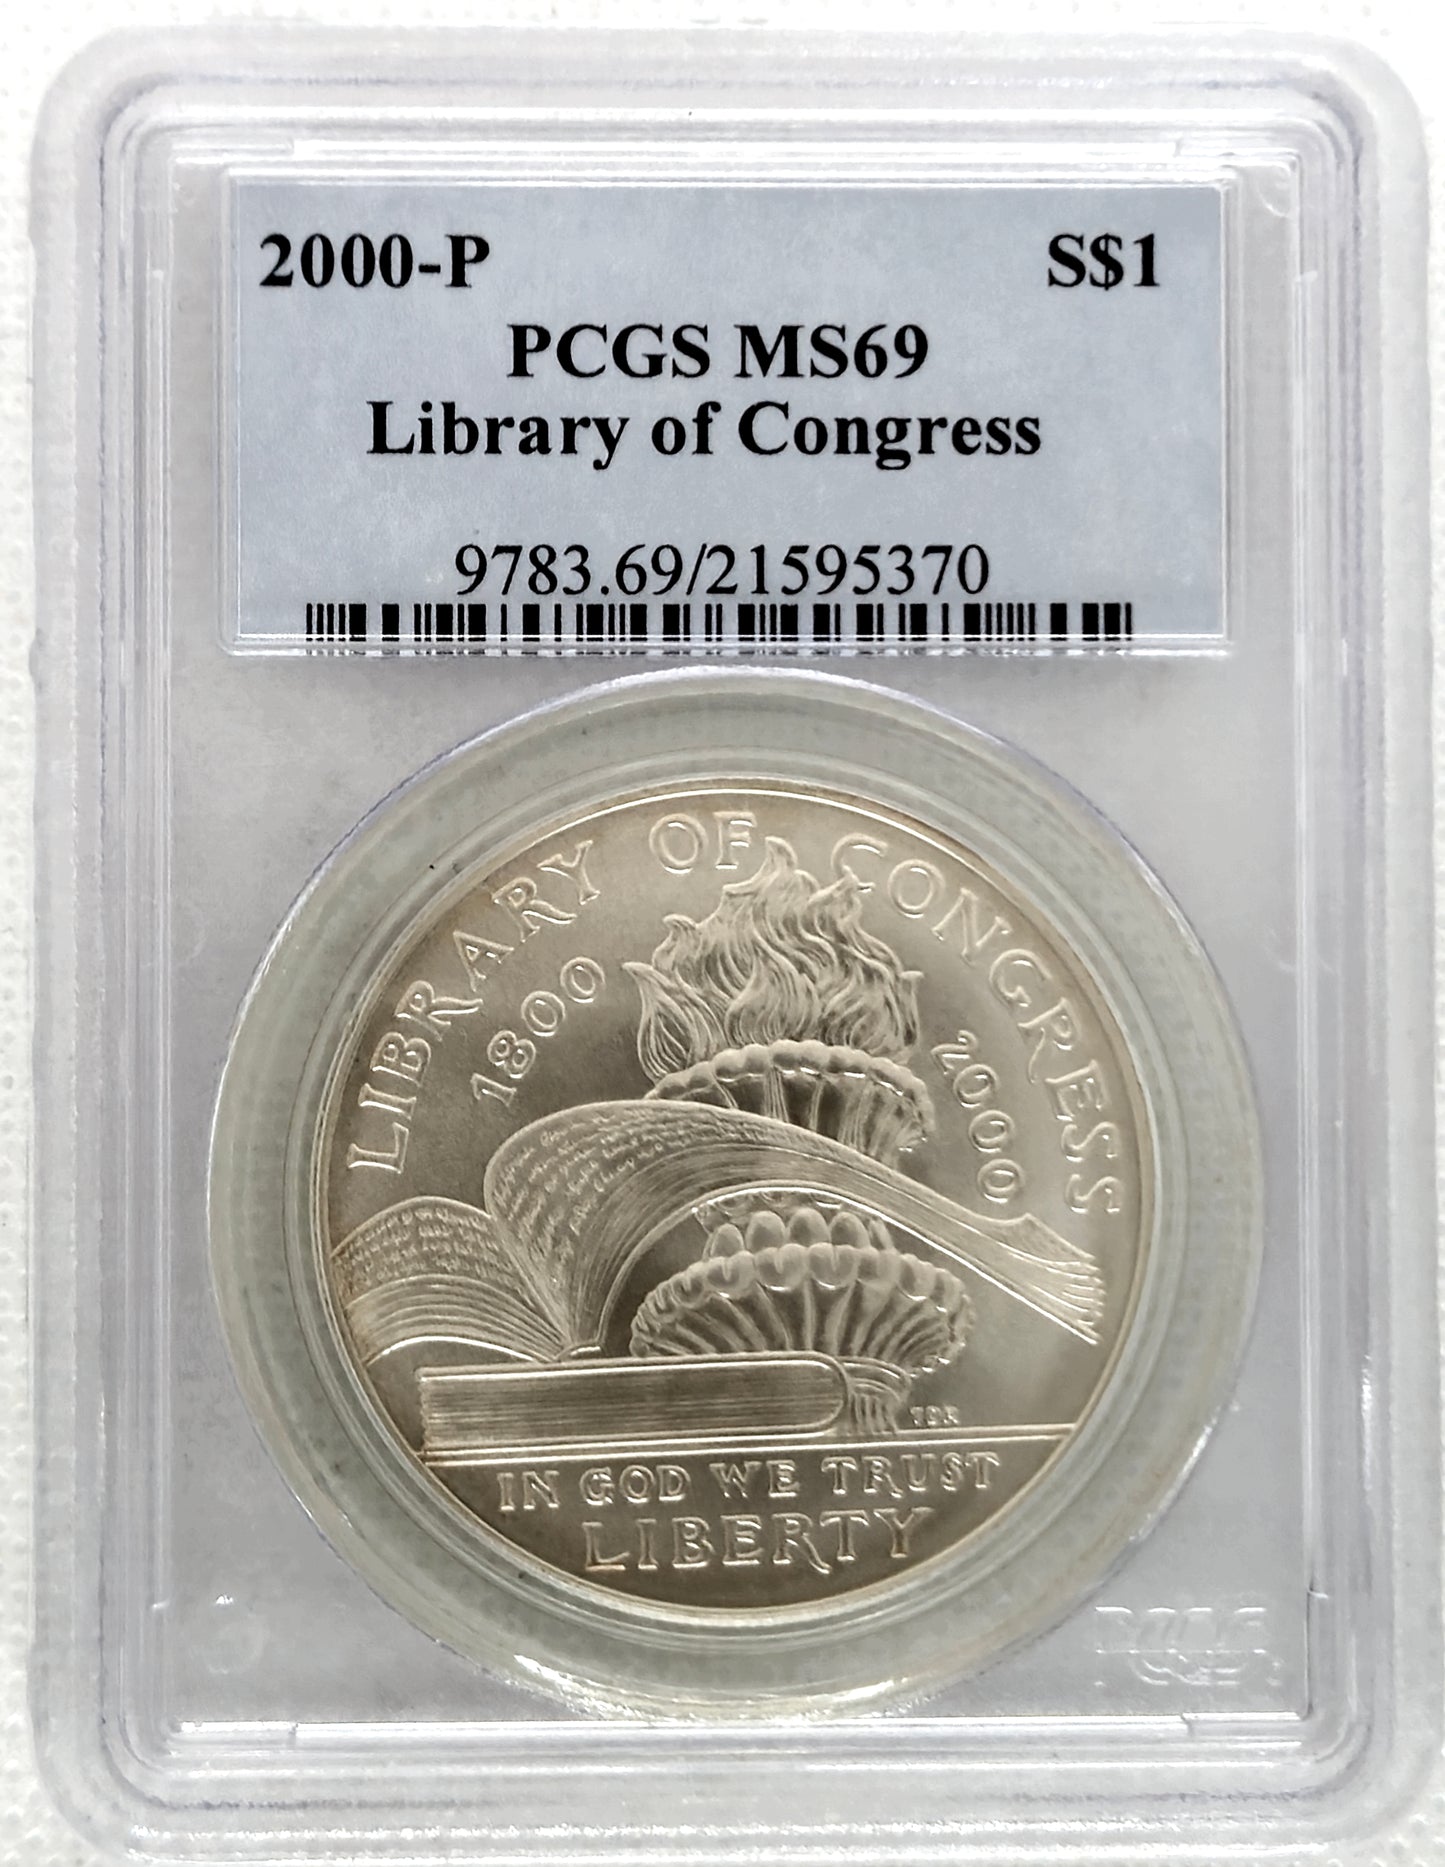 2000-P Library of Congress PCGS MS 69 Commemorative Silver Dollar